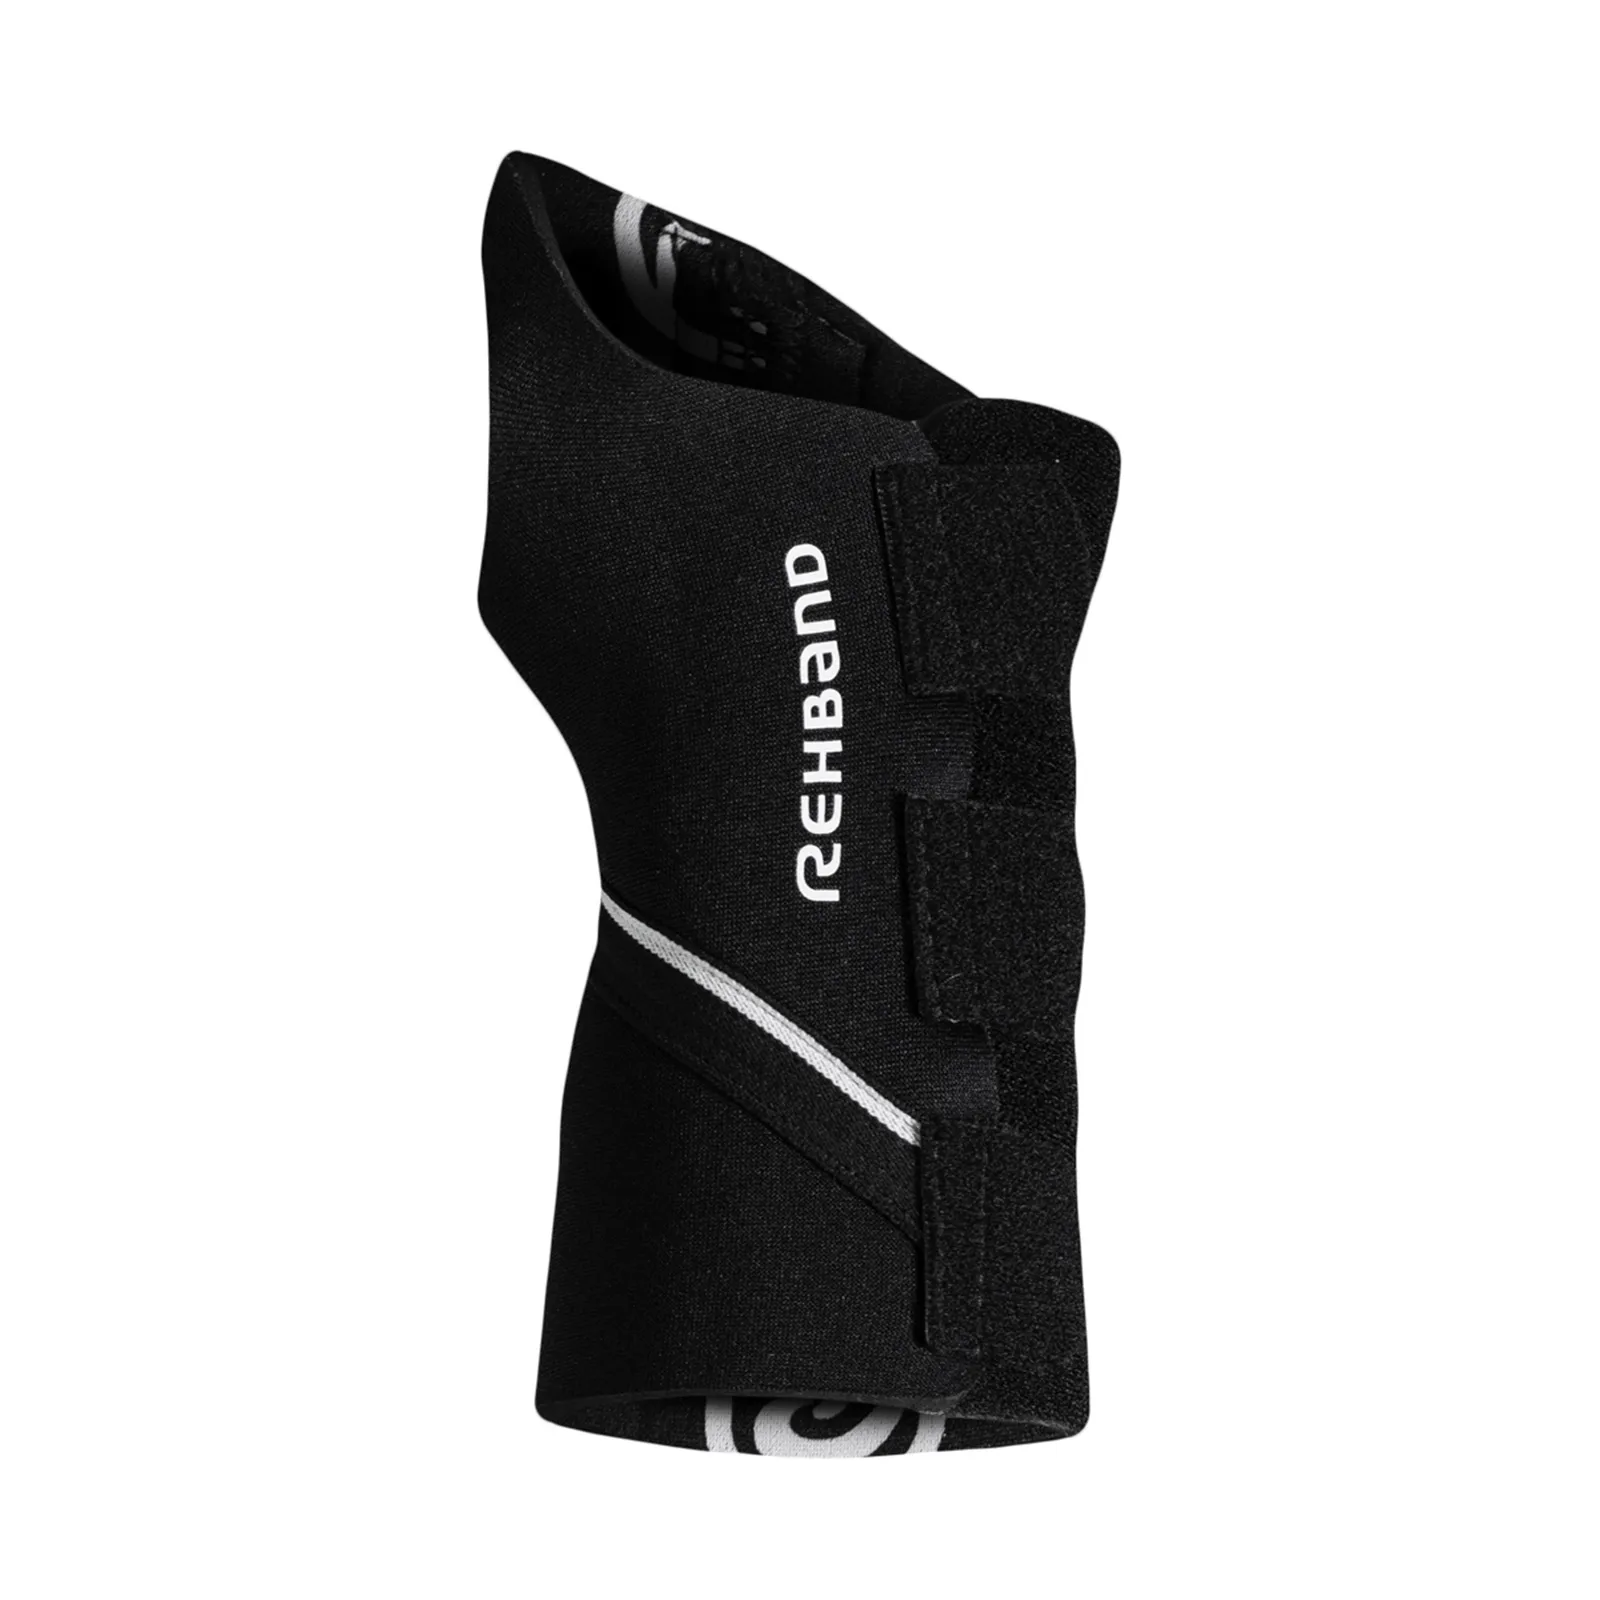 Ottobock - From: 121306-012233 To: 121306-012433 - UD Wrist Brace 5mm Right Black S/M